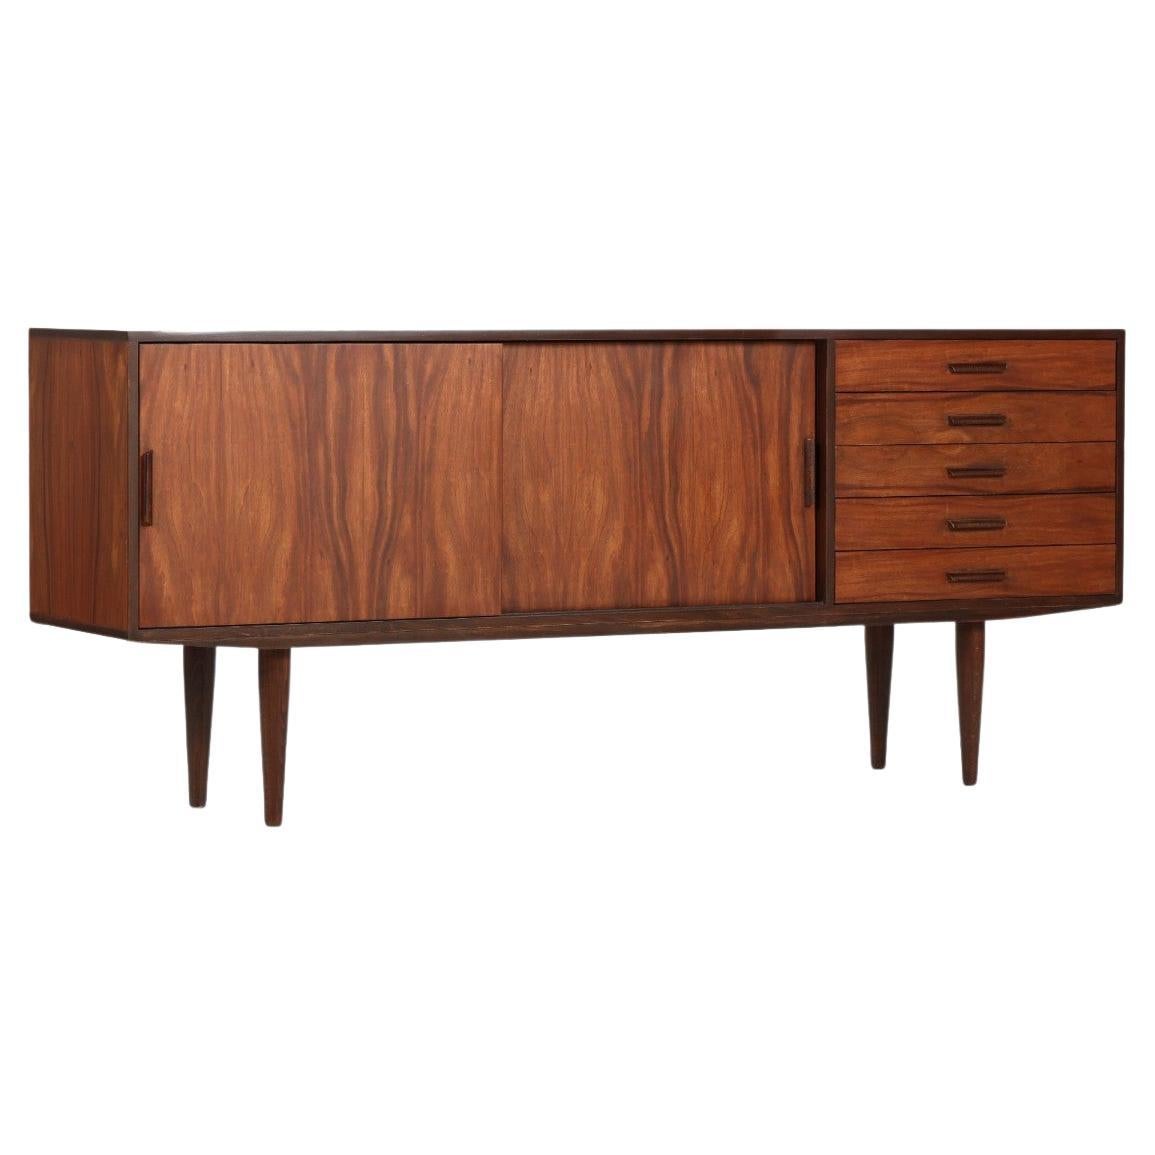 Danish sideboard from 1960s. 